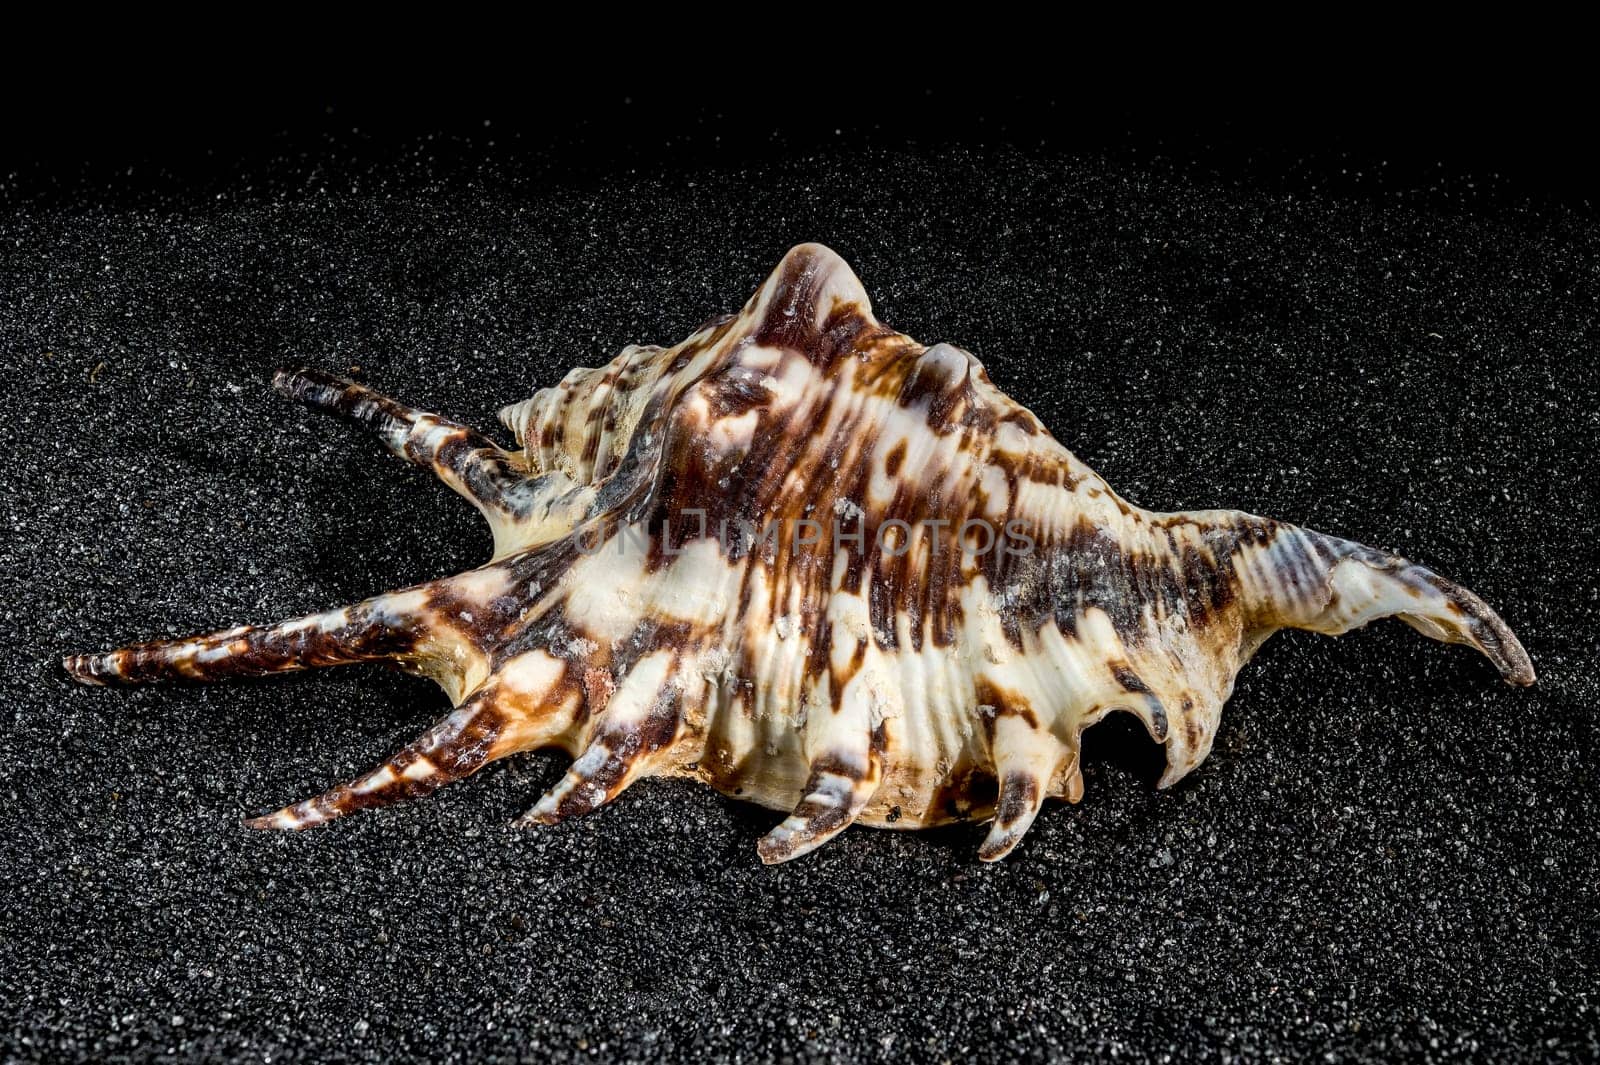 Spider conch seashell, lambis tiger, on a black sand background close-up